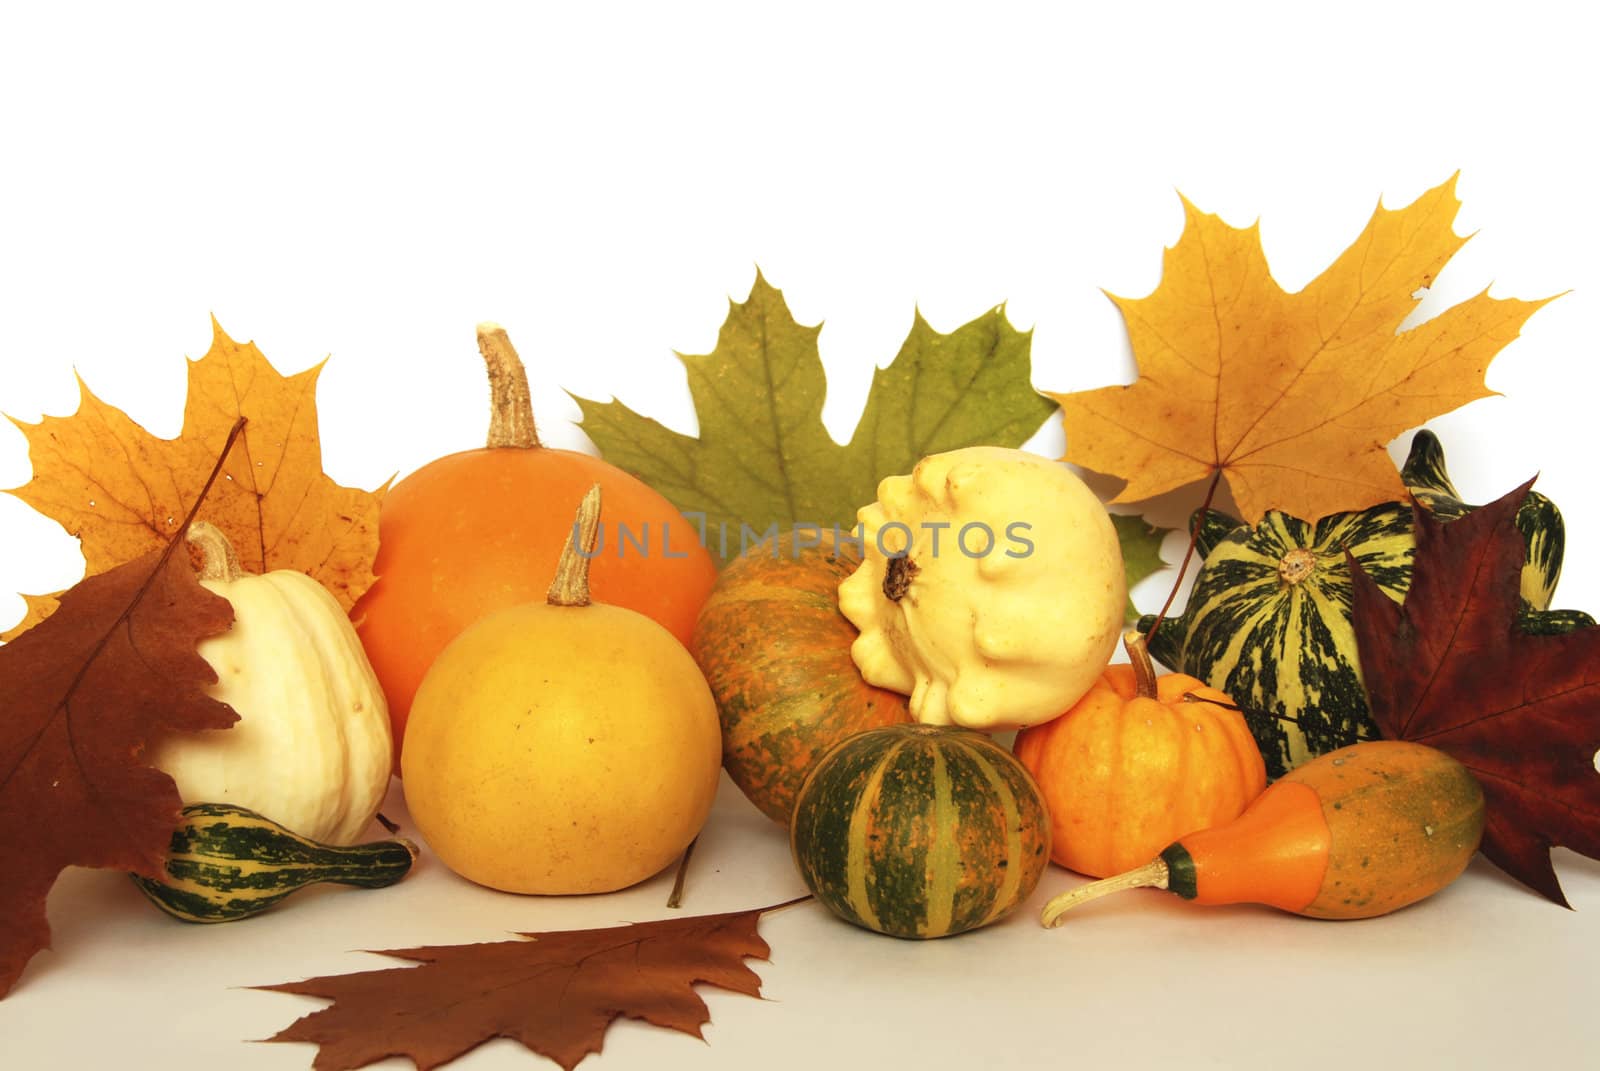 Autumn still-life with colorful pumkins and maple leaves